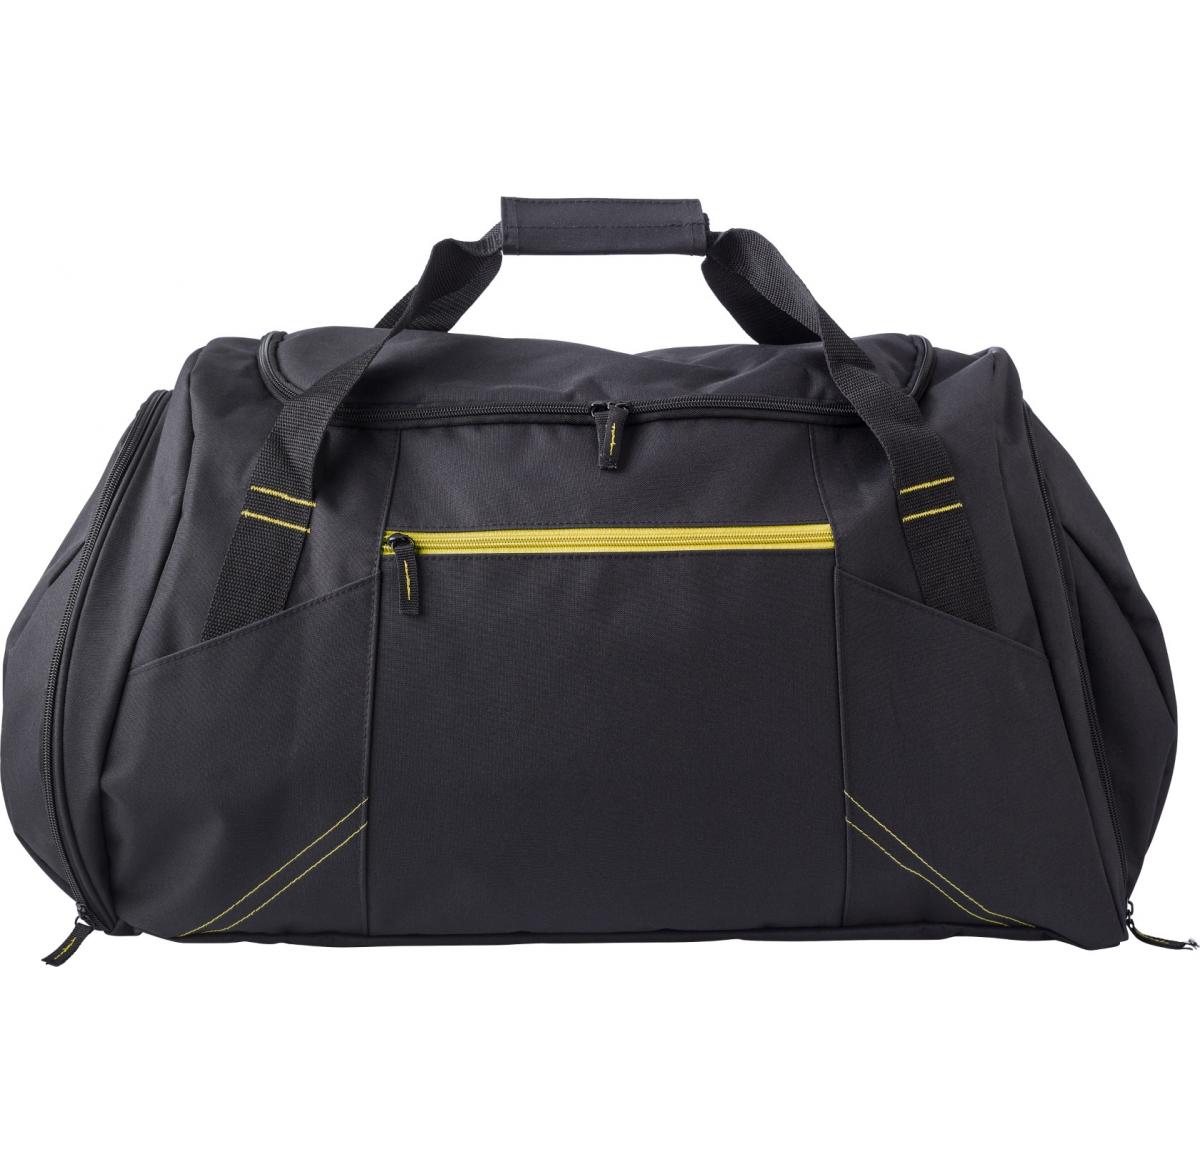 Branded Sports Bags Polyester (300D) 